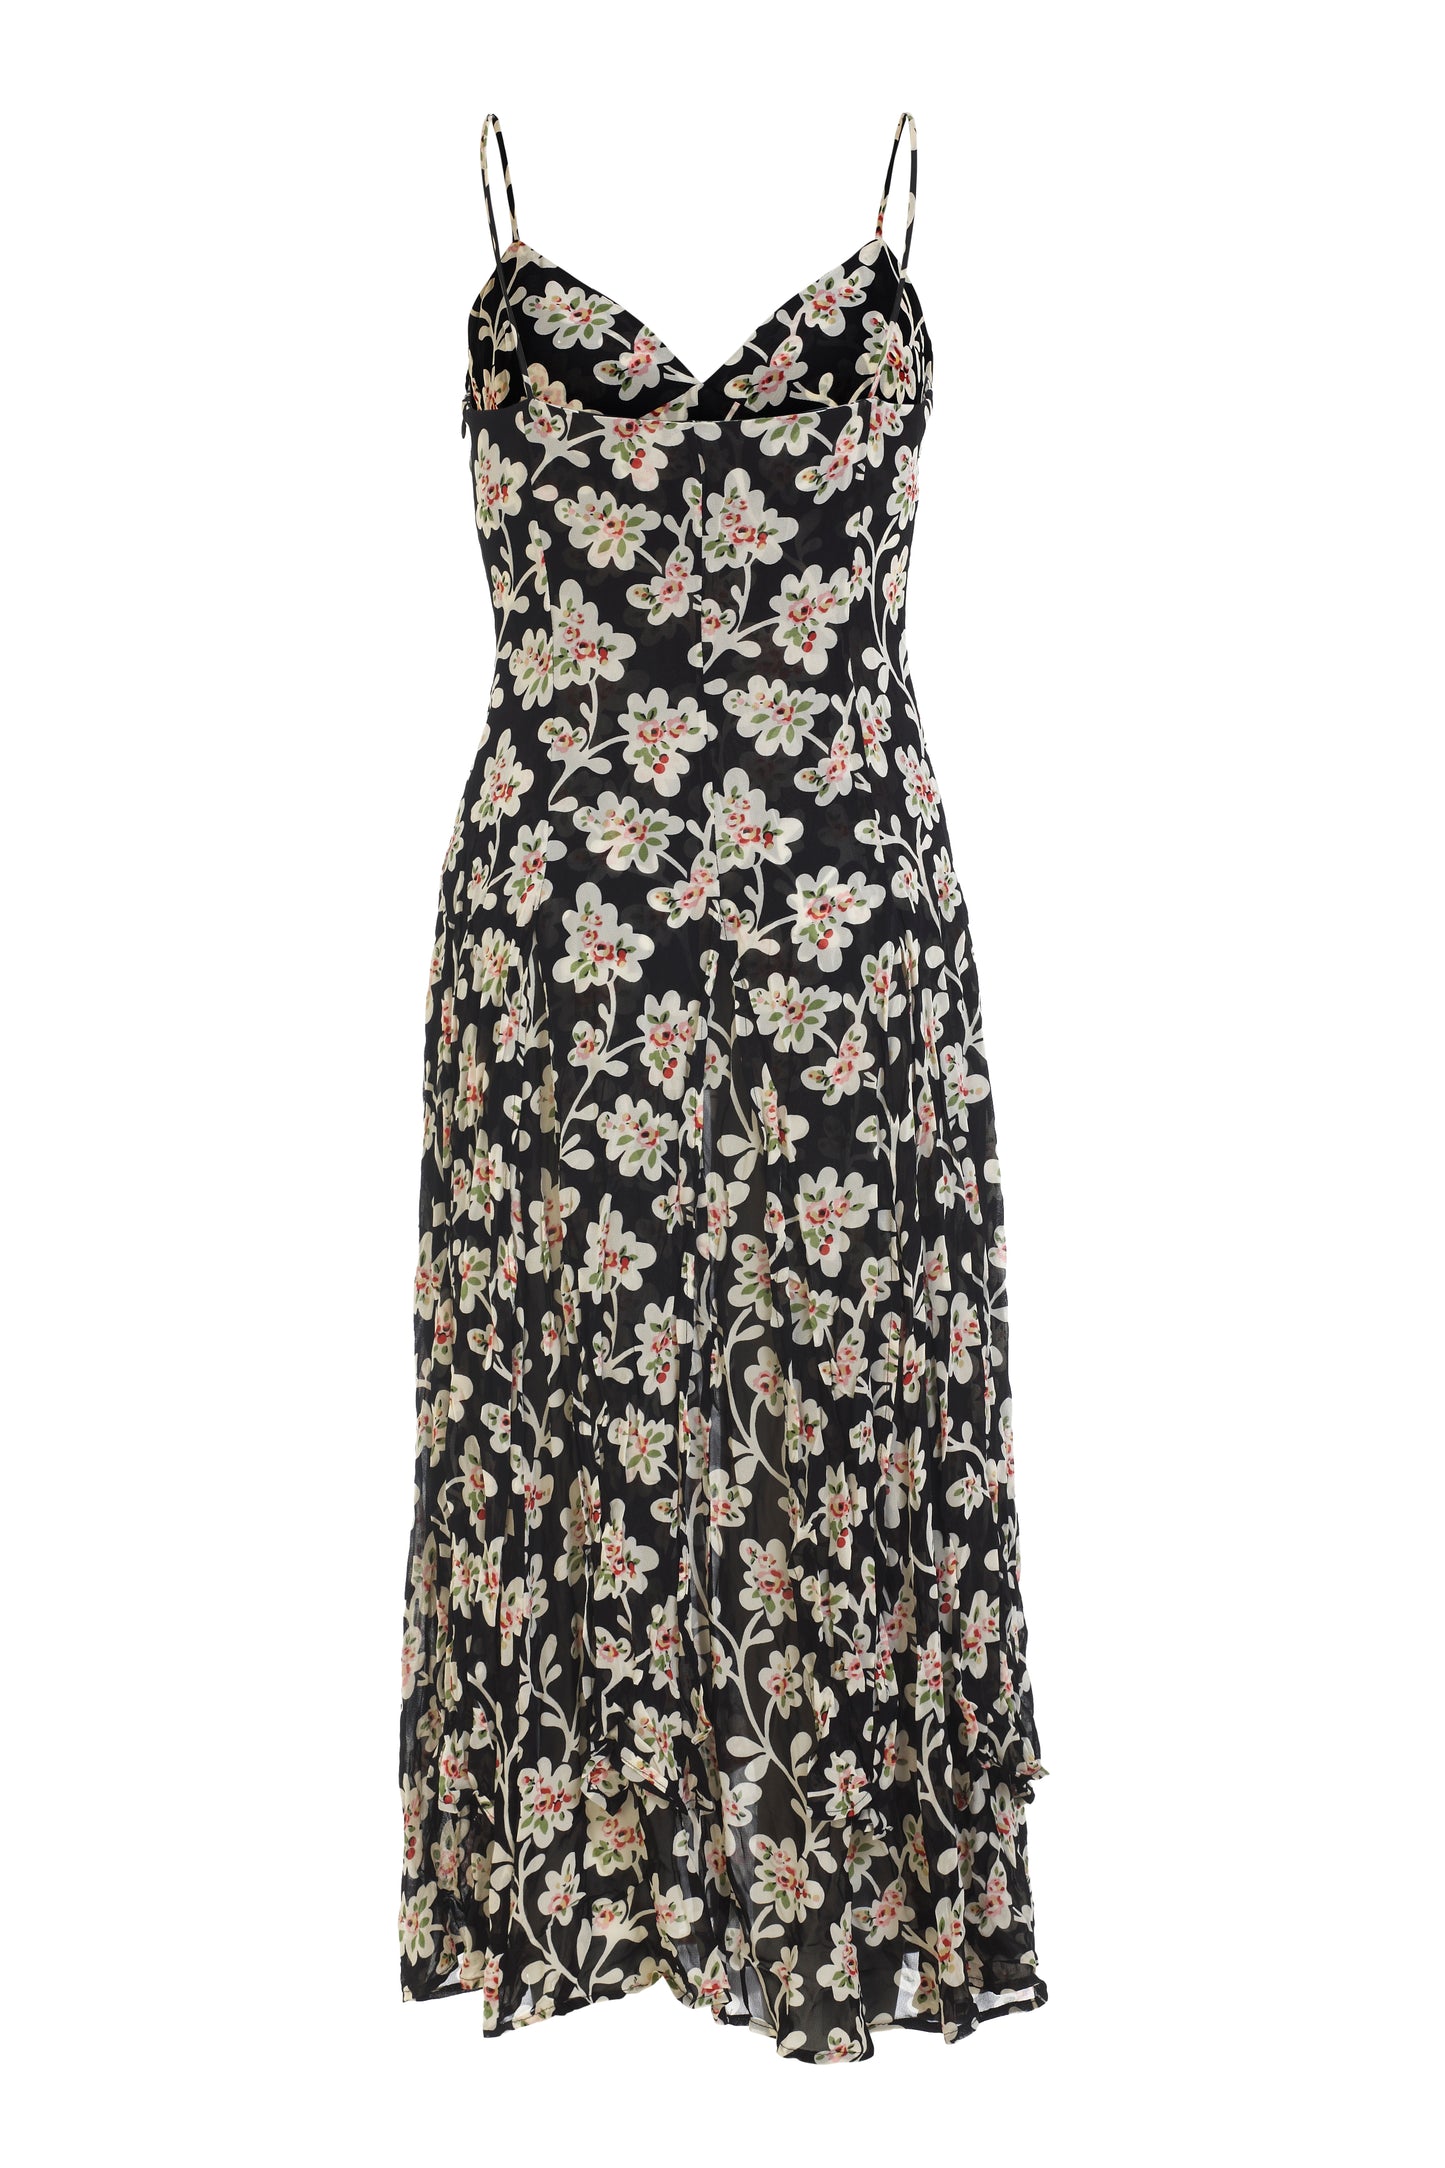 Moschino Cheap and Chic black summer dress with floral print